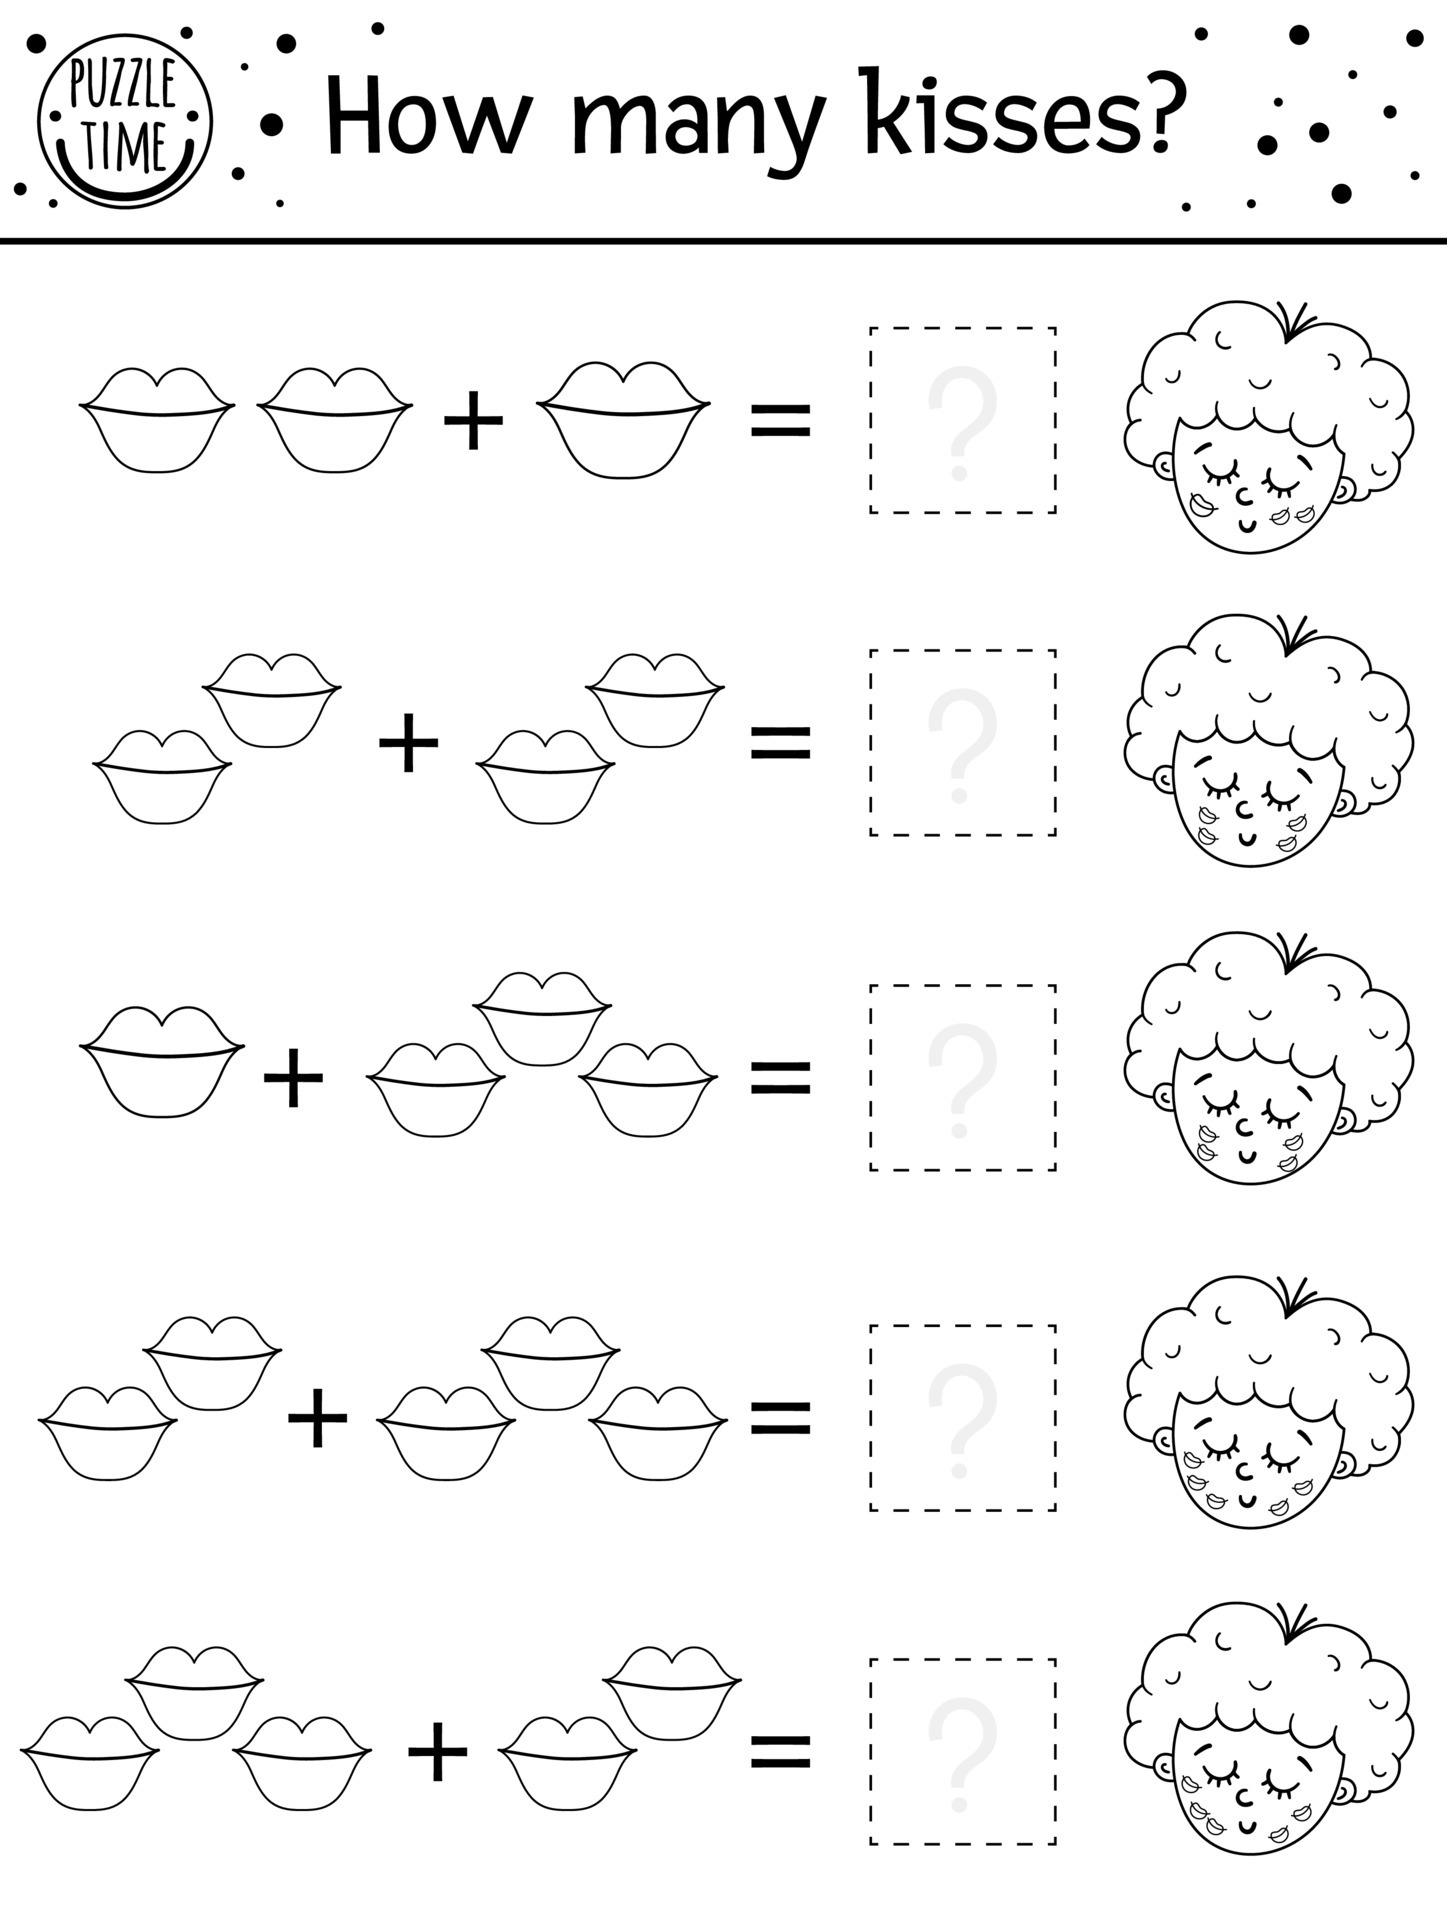 saint valentine day black and white counting game with kisses and cupid holiday activity for preschool children with love theme educational printable math worksheet addition outline puzzle for kids 4922725 vector art